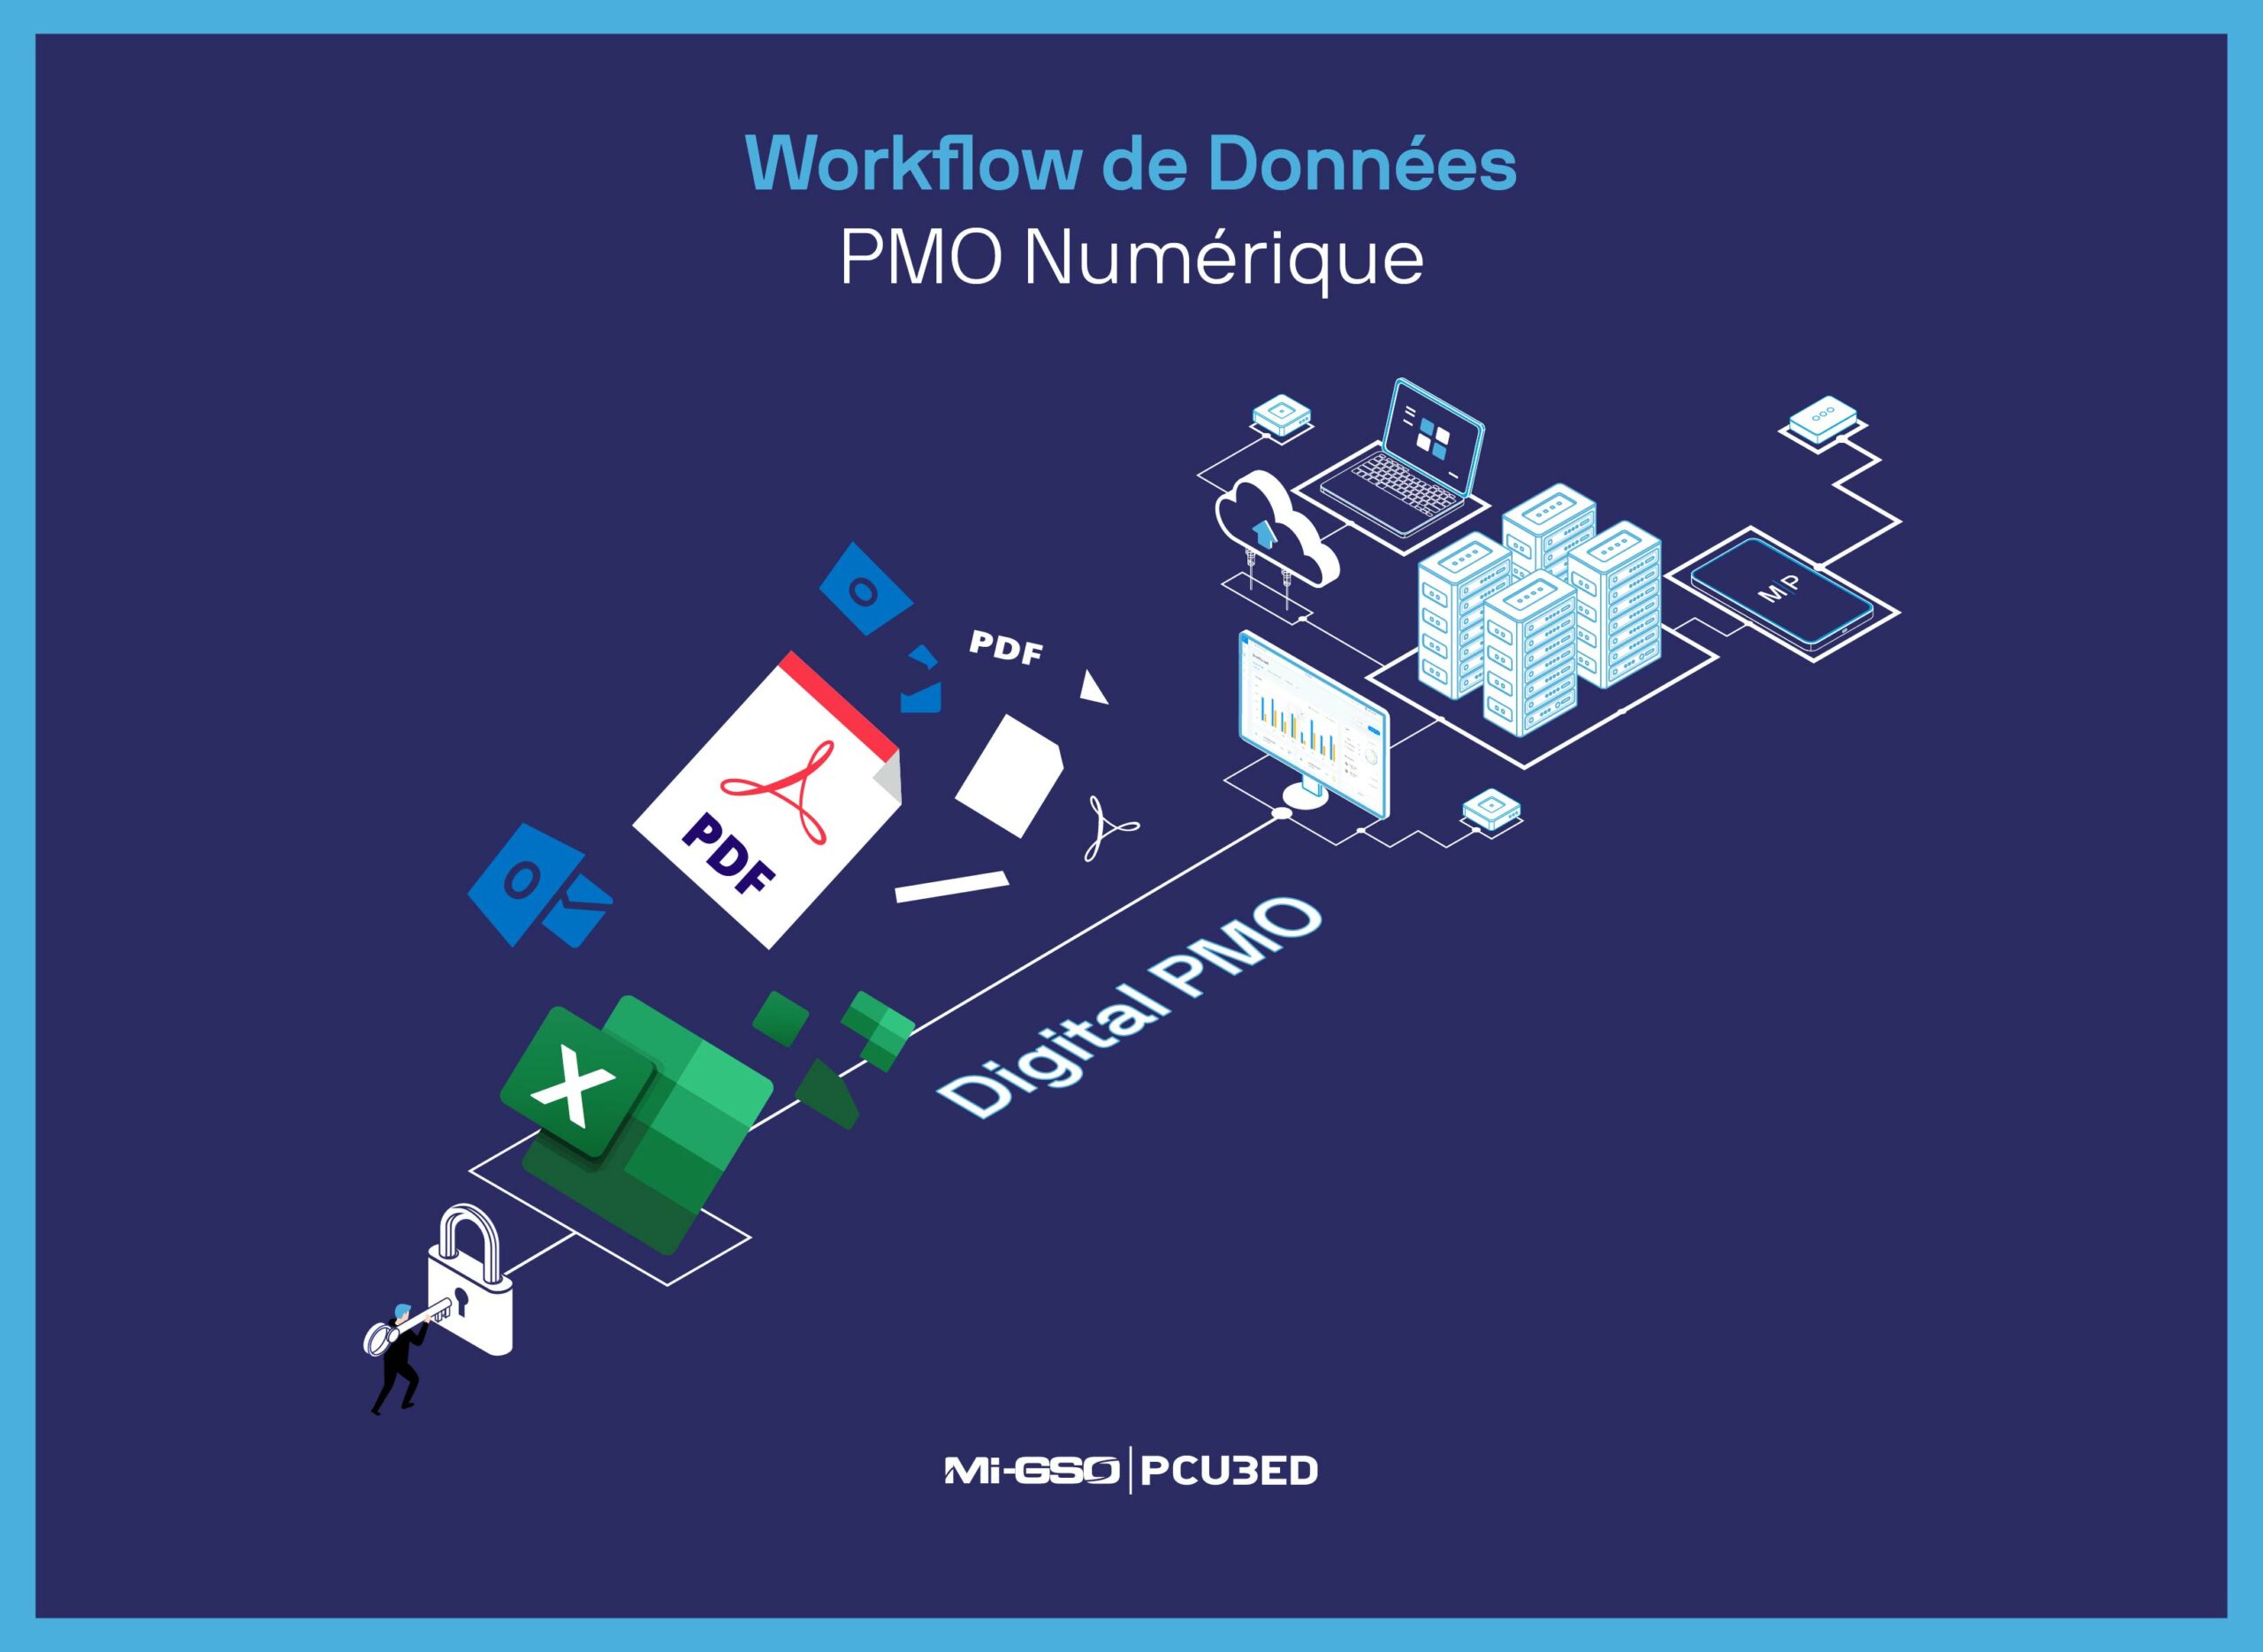 A graphic showing the data workflow within a digital PMO this includes icons such as excel pdf and word